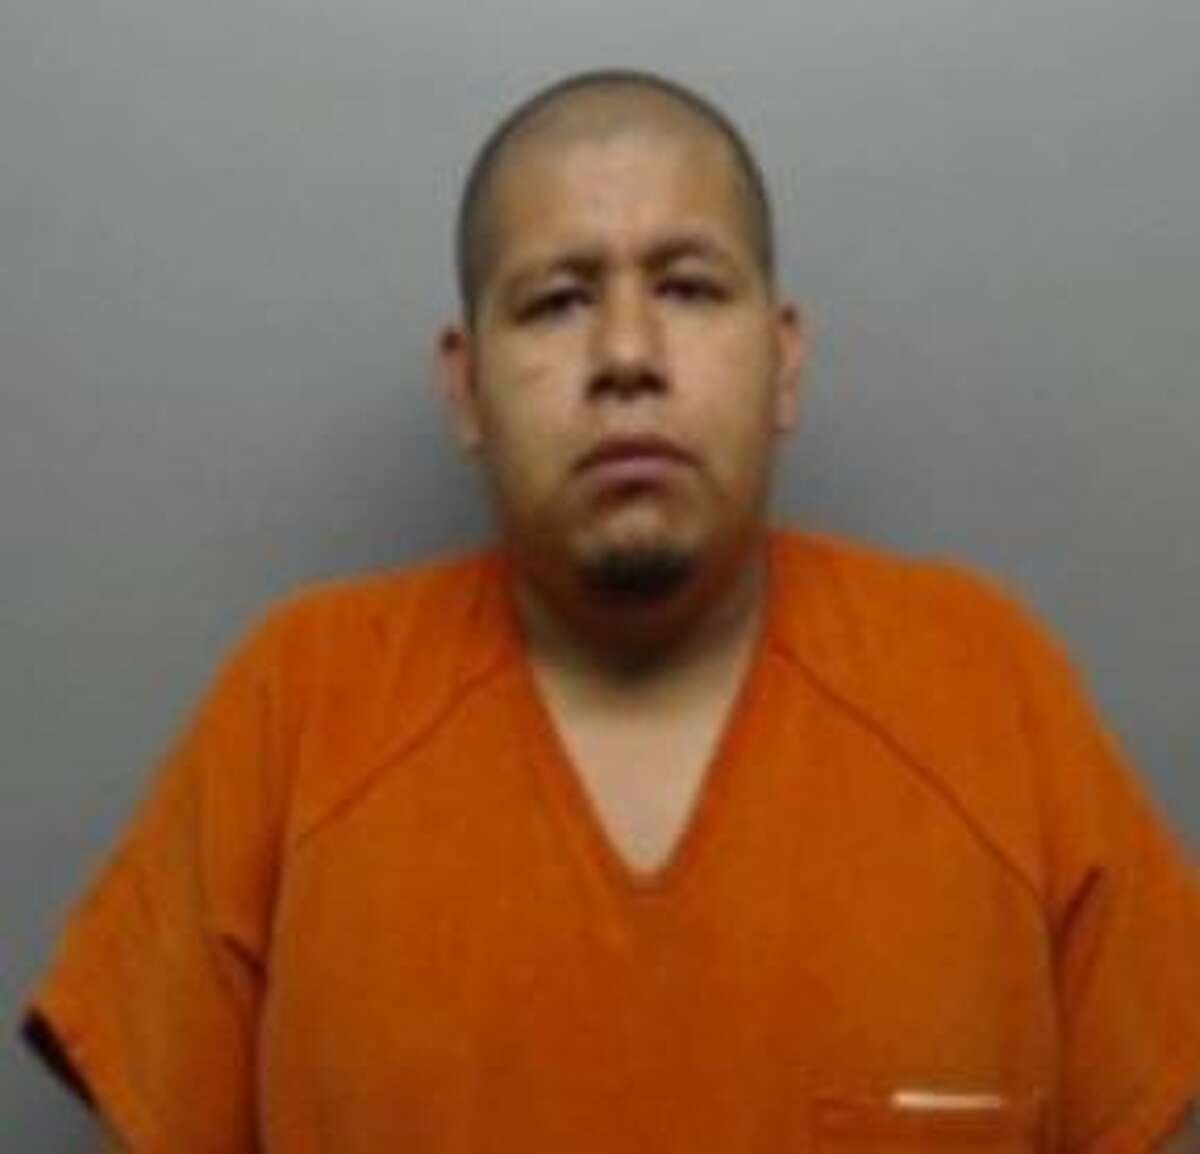 Juan Pedro Cruz Aguilar, 29, was arrested and charged with injury to a child.